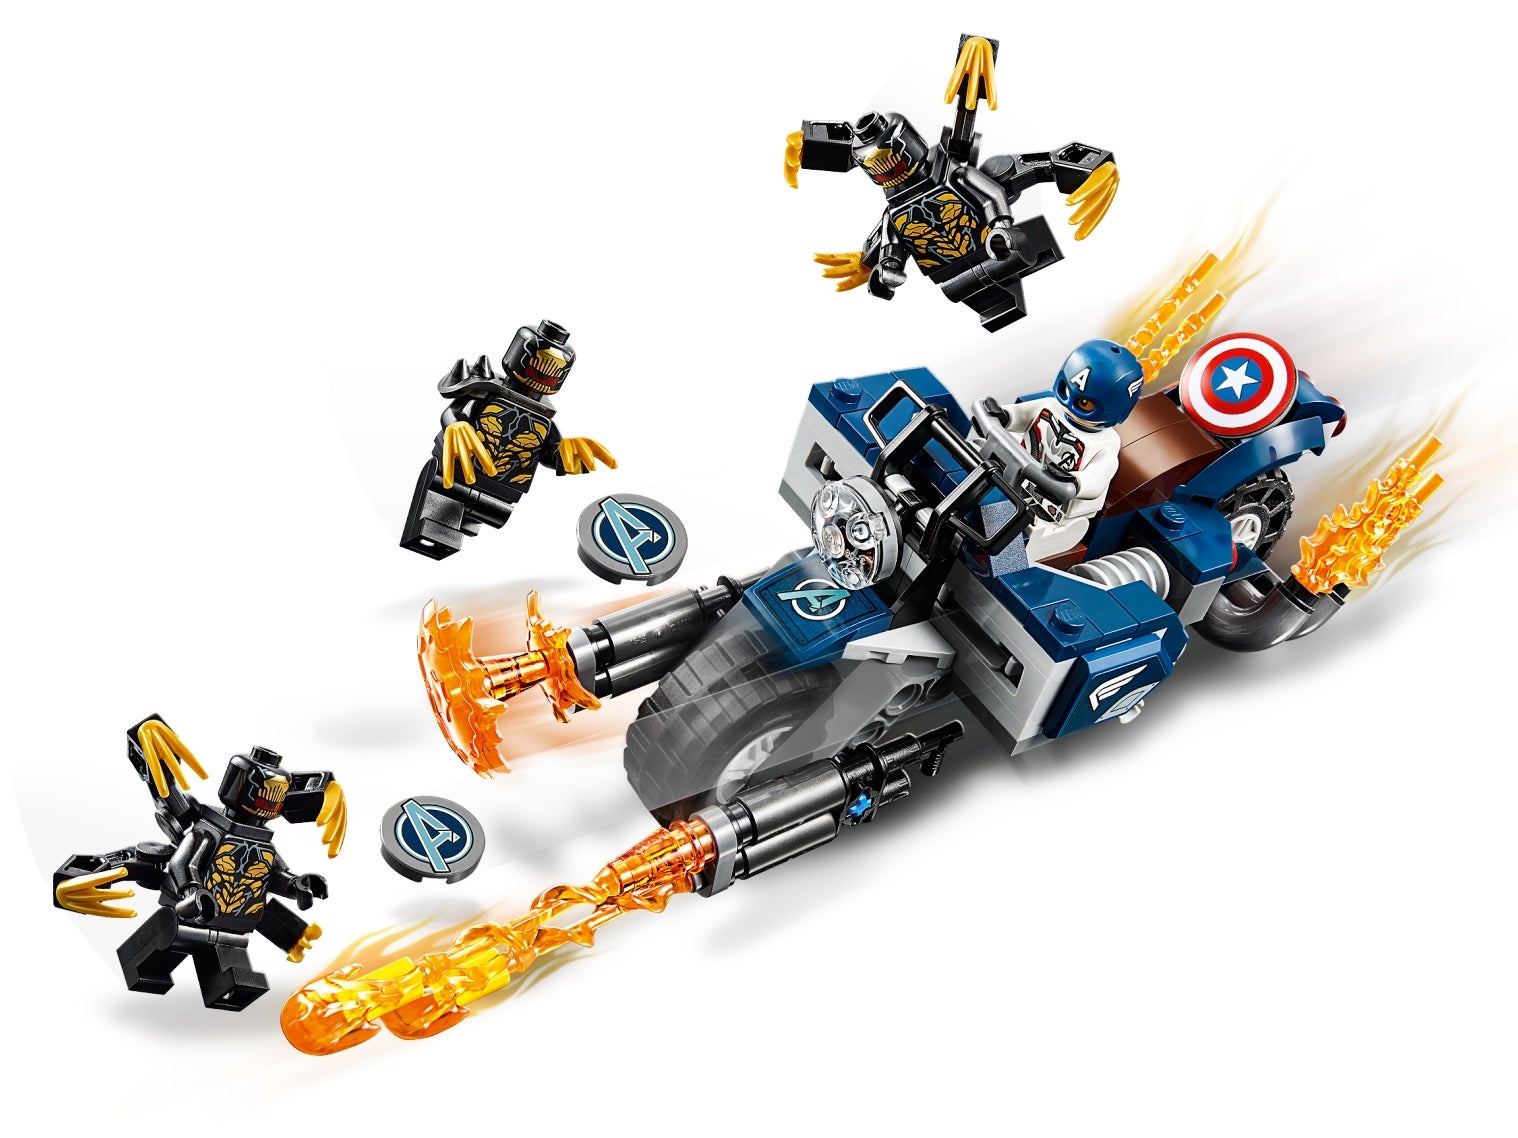 Lego Marvel Super Heroes Captain America for sale online 76123 Outriders Attack